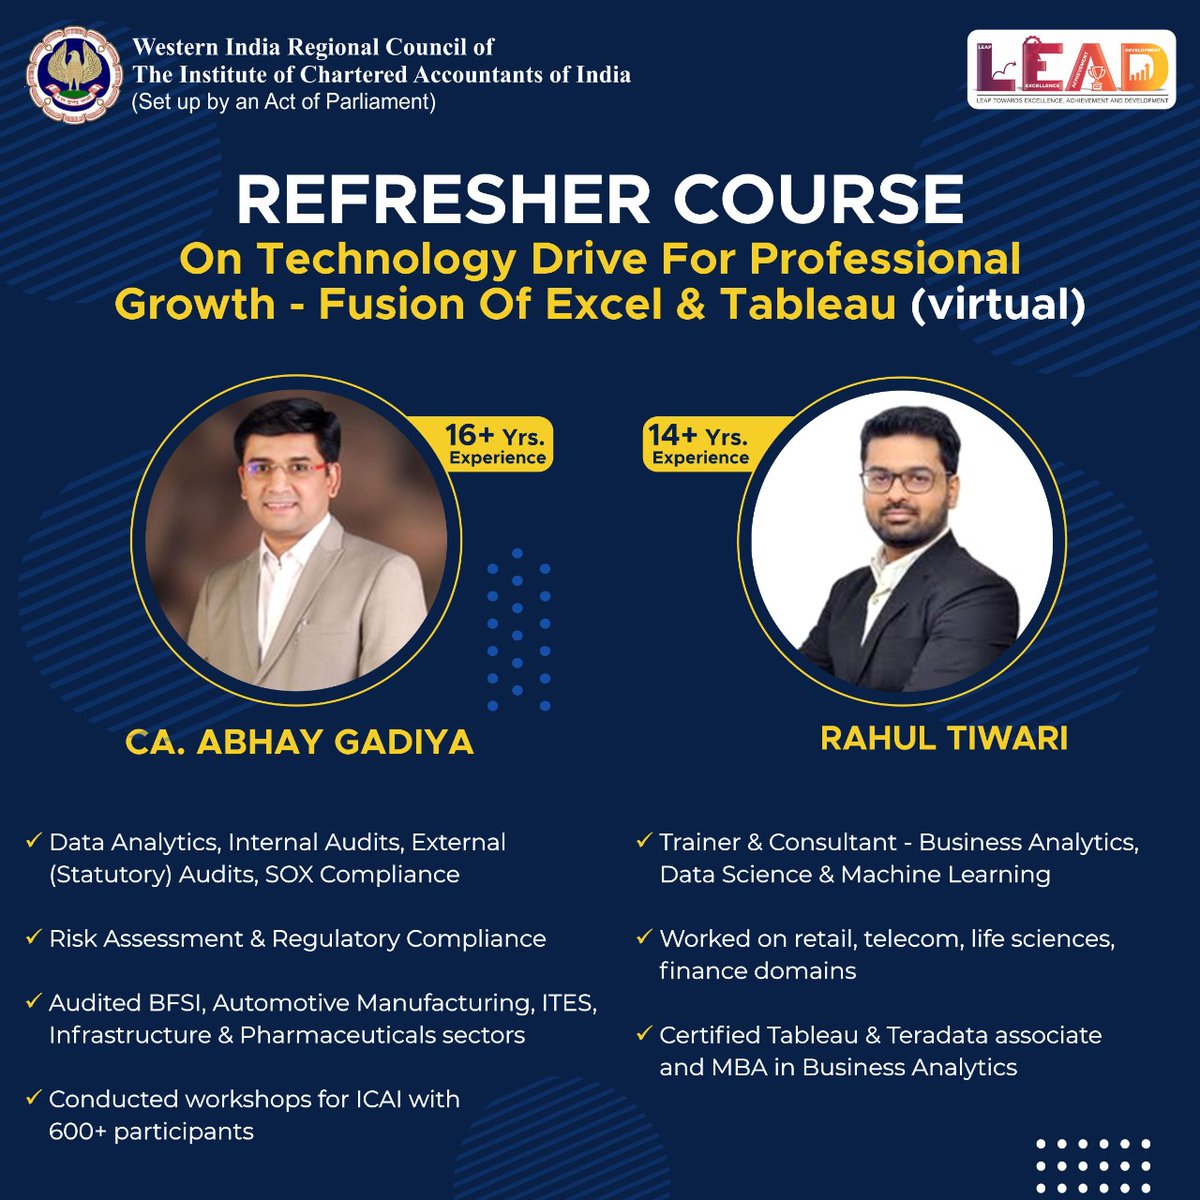 Speaker profiles for the virtual Refresher course on Technology Drive for Professional Growth - Fusion of Excel & Tableau.

Register at -

wirc-icai.org/members/regist…

#excel #tableau #dataanalysistools #dataanalytics #refreshercourse #technology #Statistics #virtualprogram #wirc